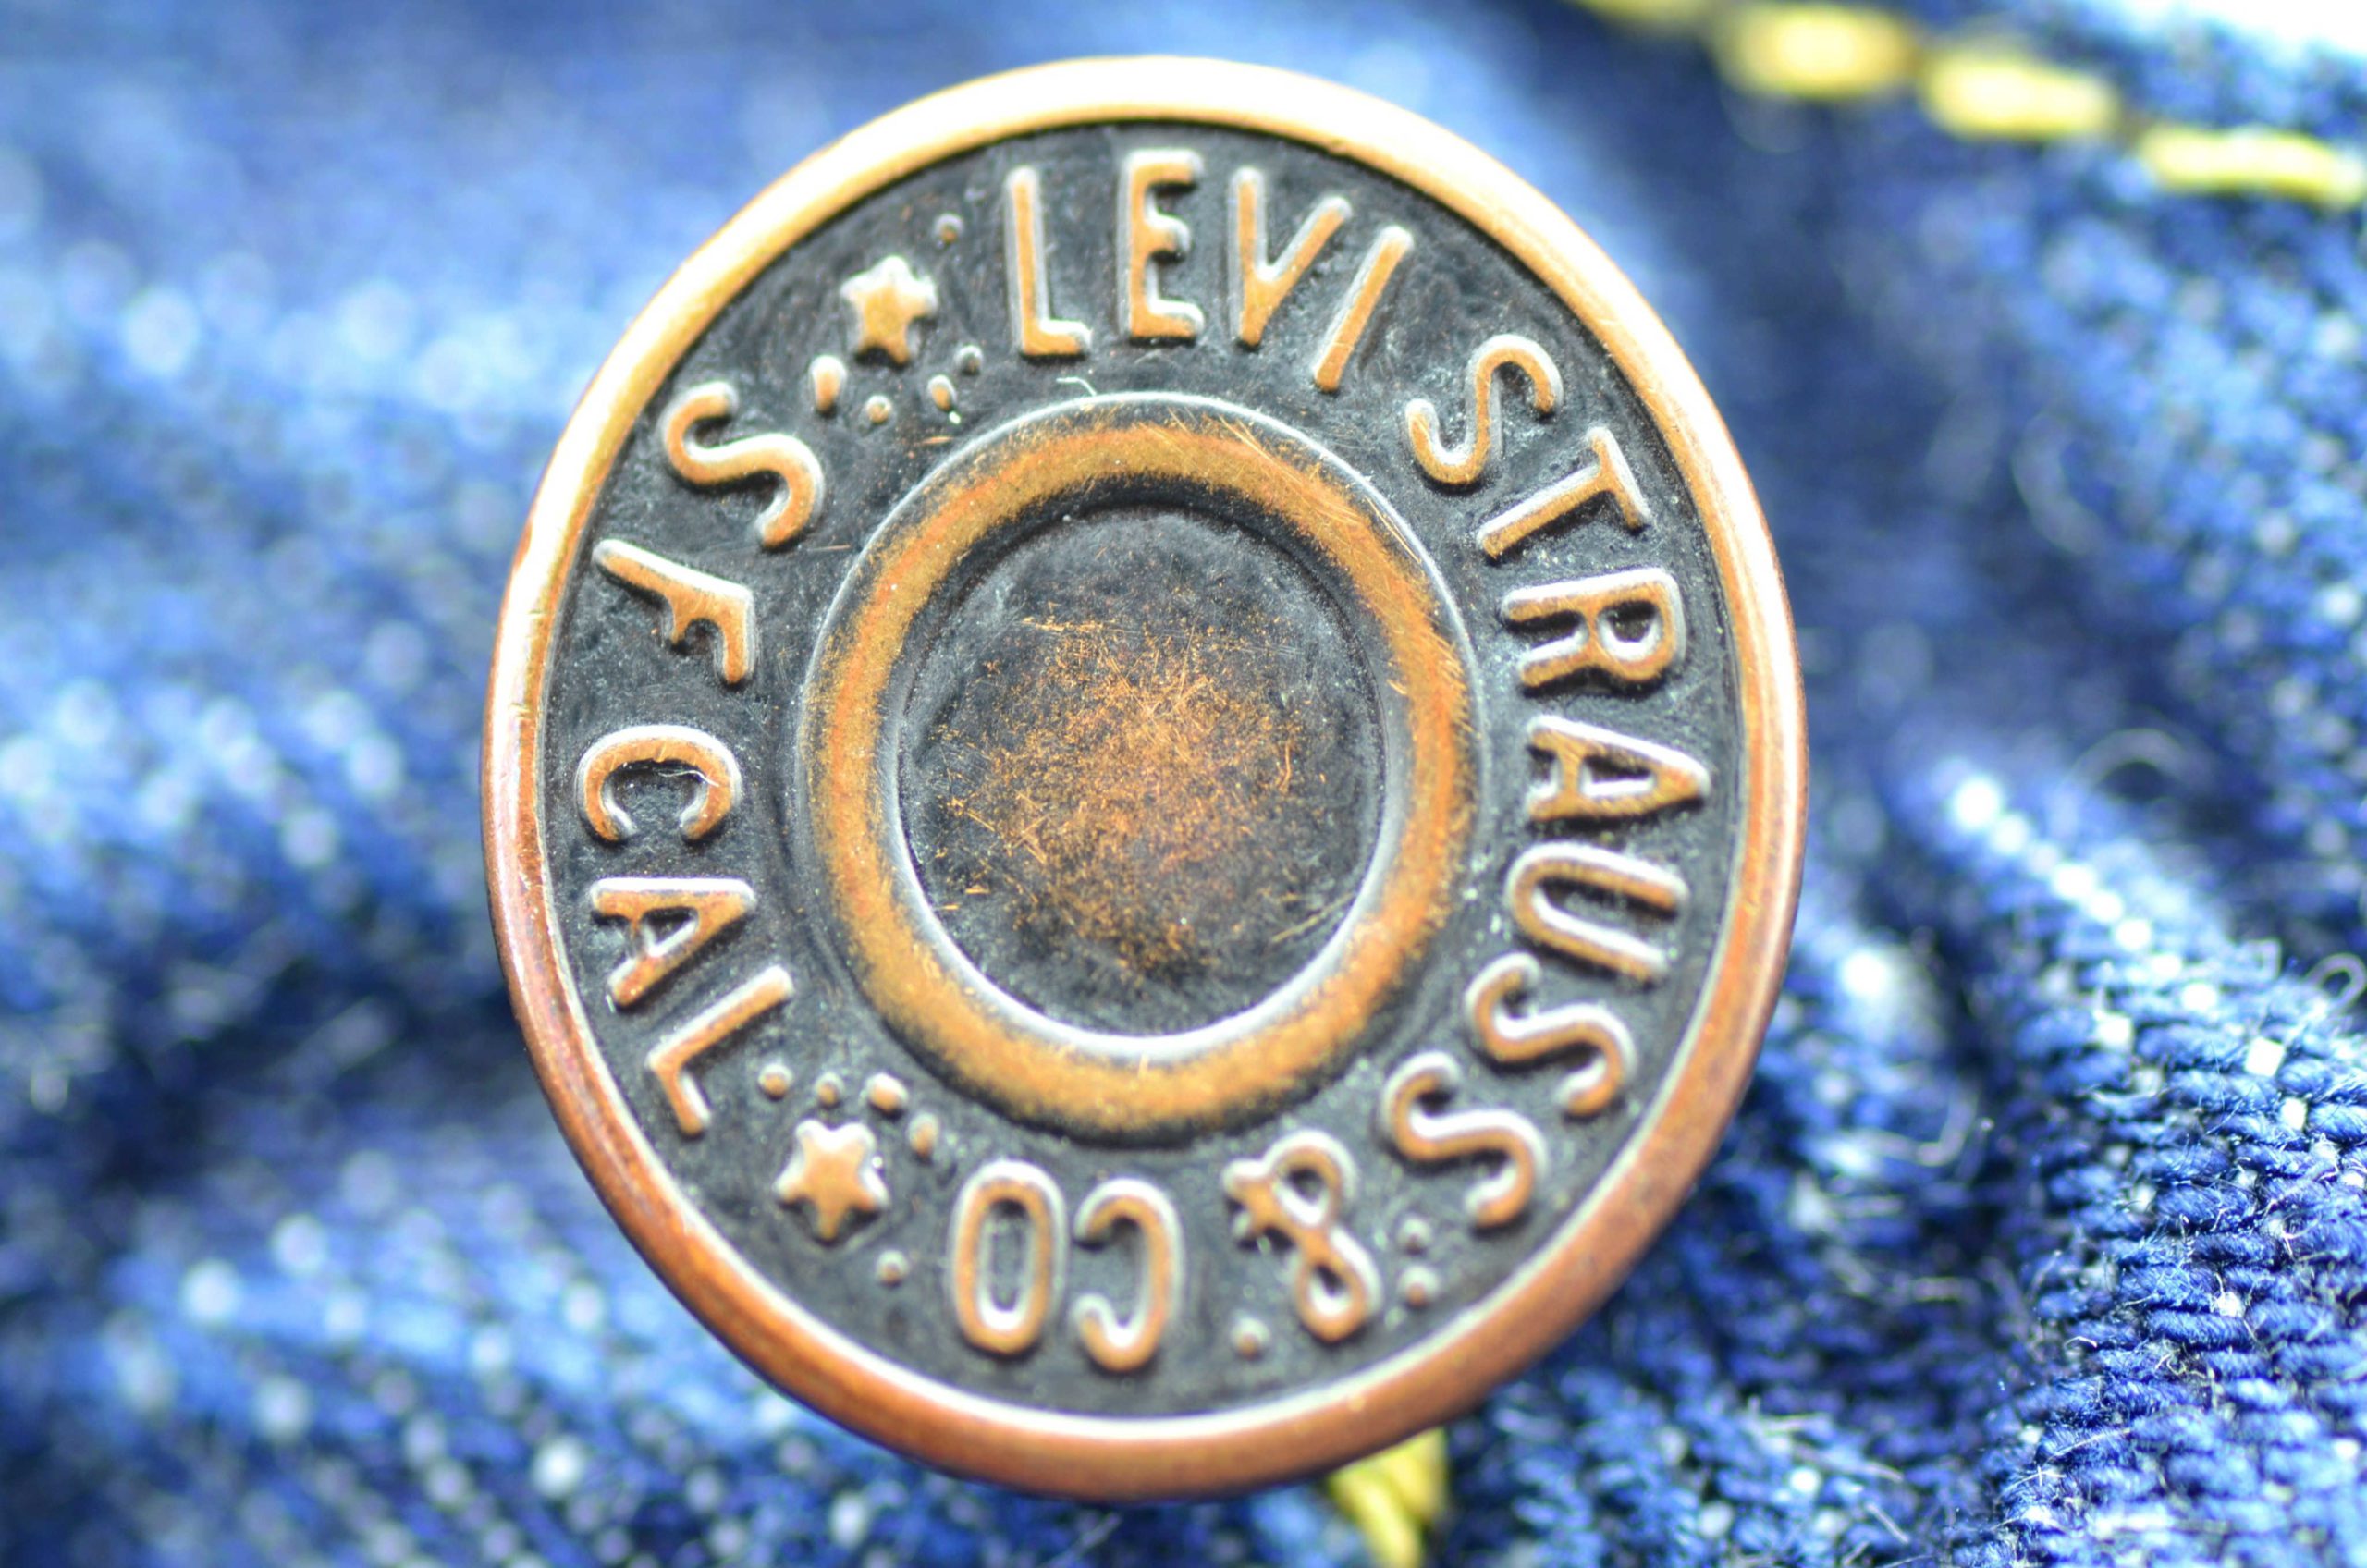 I'm happy Spooky Flare Levi Strauss wants to triple ecommerce sales by 2027